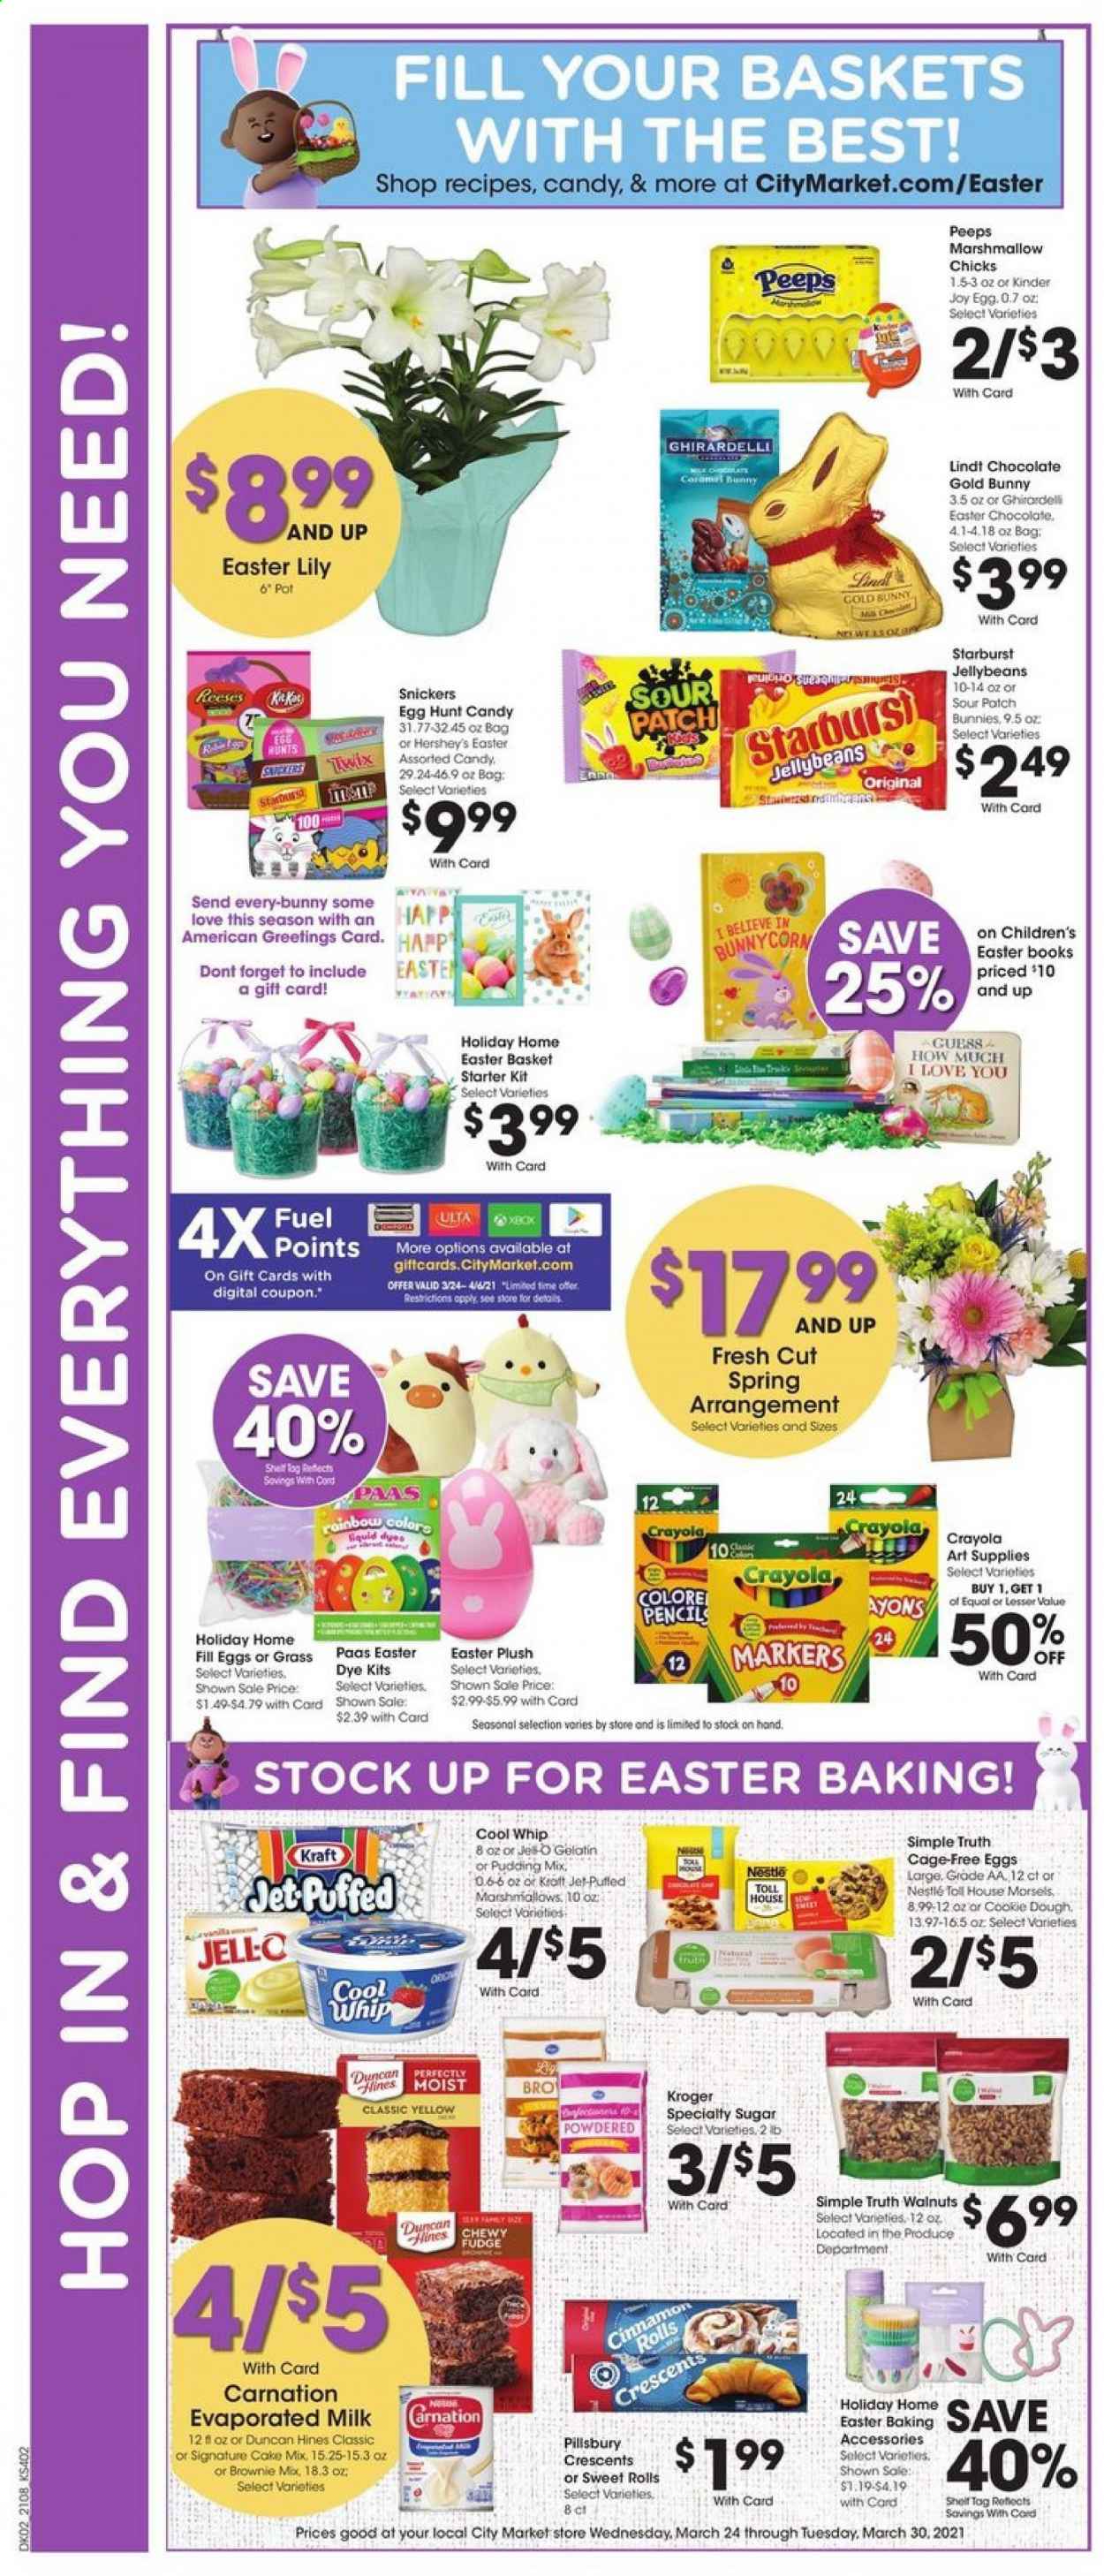 thumbnail - City Market Flyer - 03/24/2021 - 03/30/2021 - Sales products - brownie mix, cake mix, cinnamon roll, Pillsbury, Kraft®, pudding, evaporated milk, eggs, Cool Whip, Reese's, Hershey's, cookie dough, fudge, marshmallows, Nestlé, chocolate, Lindt, Kinder Joy, Snickers, Twix, Ghirardelli, Starburst, sour patch, Peeps, sugar, Jell-O, caramel, walnuts, Joy, Jet, Guess, basket, pot, baking accessories, crayons, pencil, cage, plush toy. Page 1.